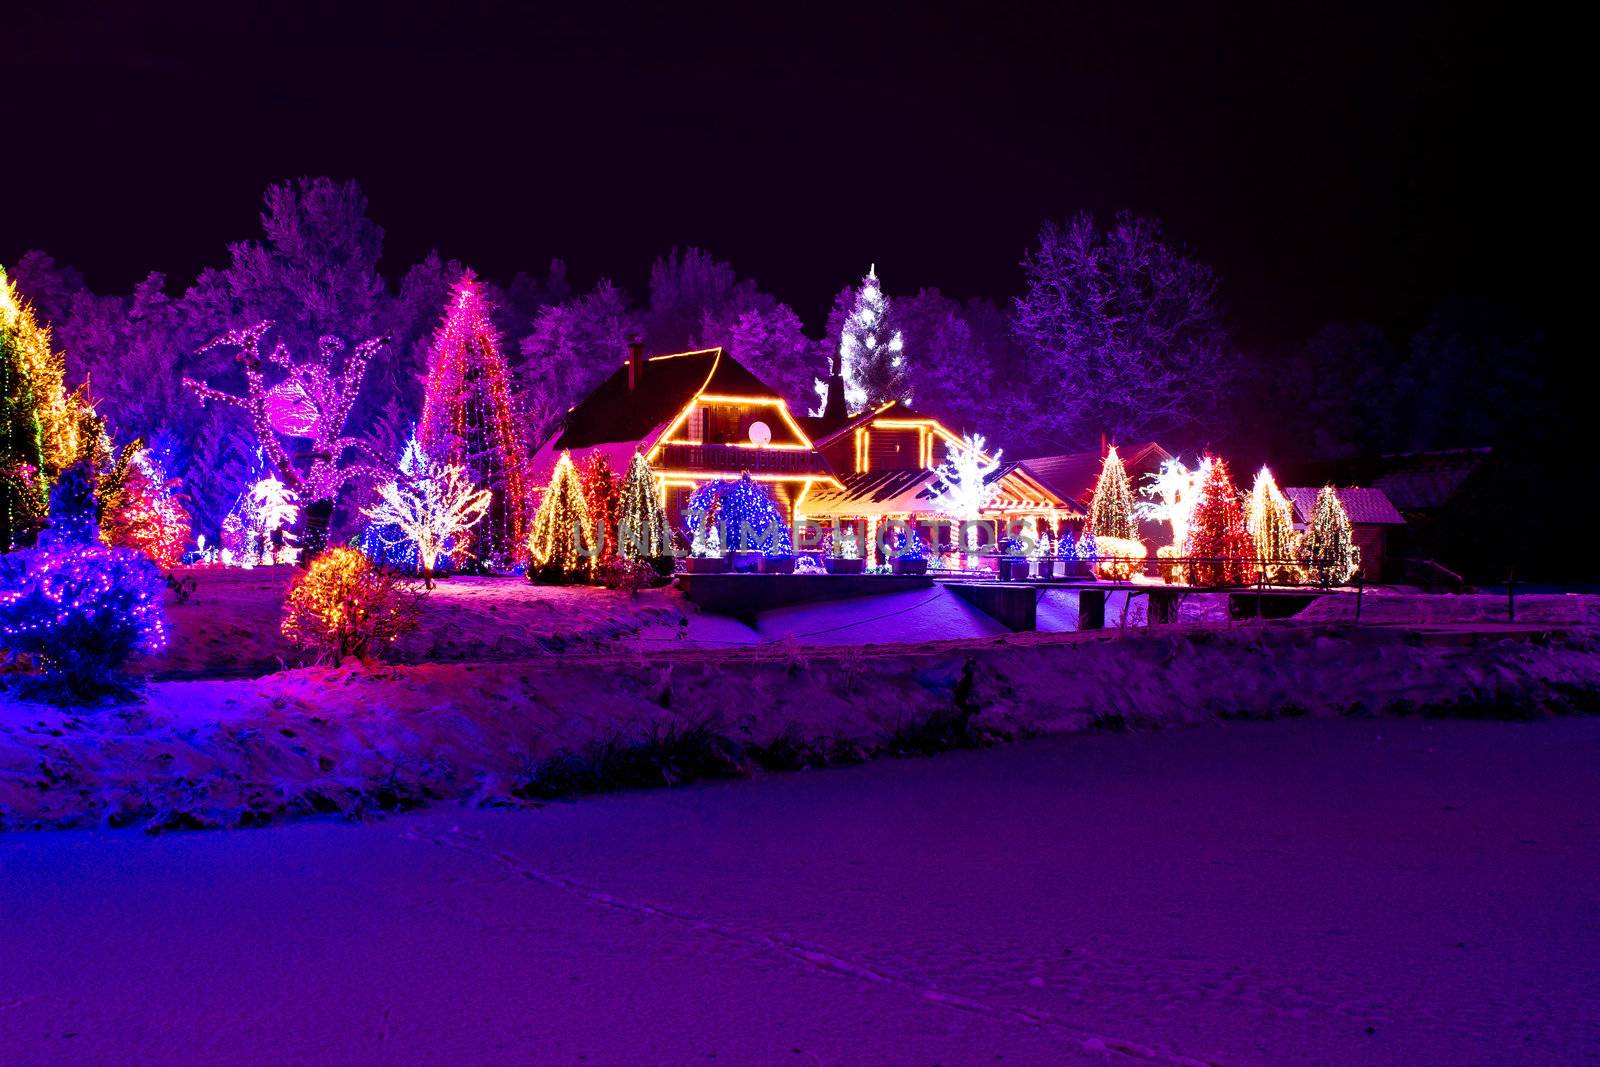 Christmas fantasy - park, forest & lodge in xmas lights by xbrchx